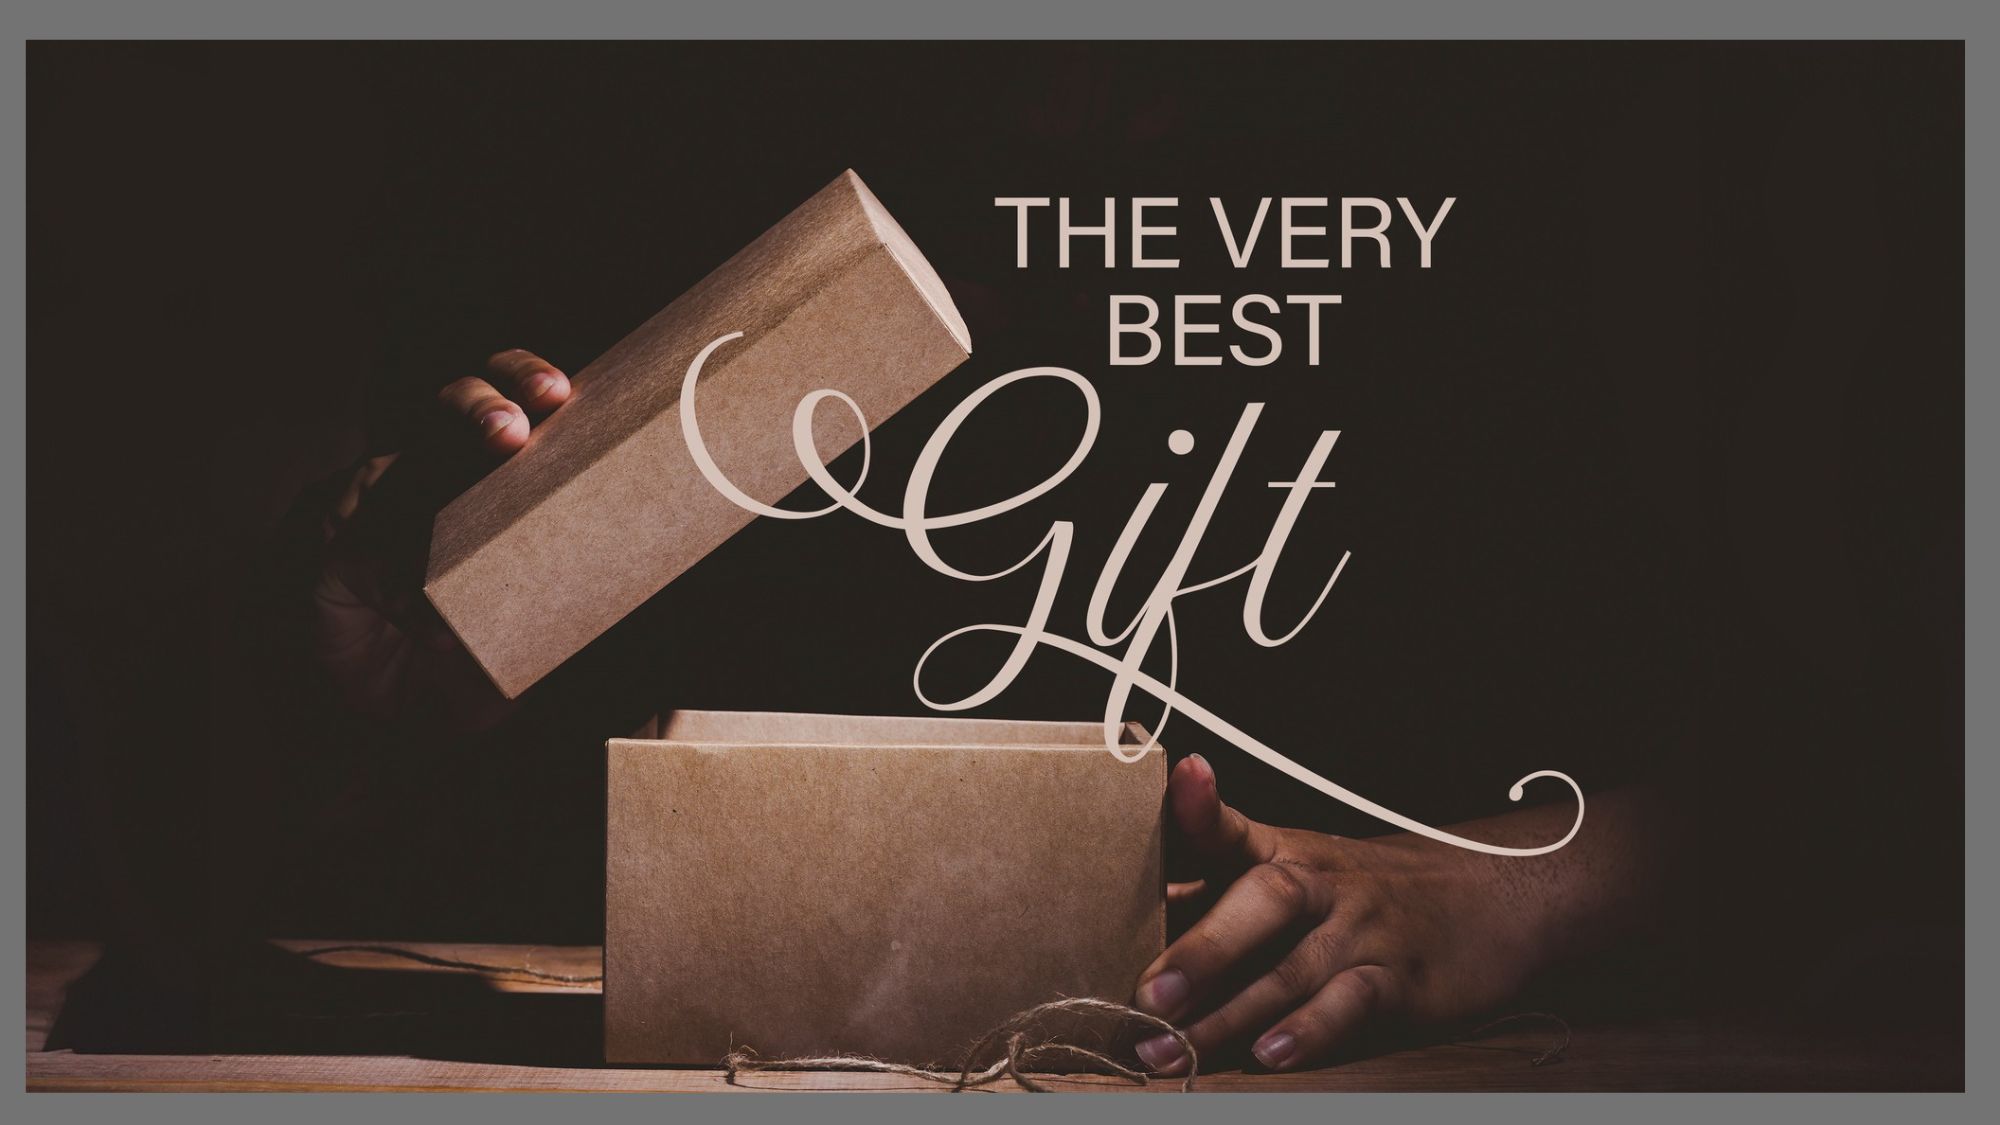 The Very Best Gift